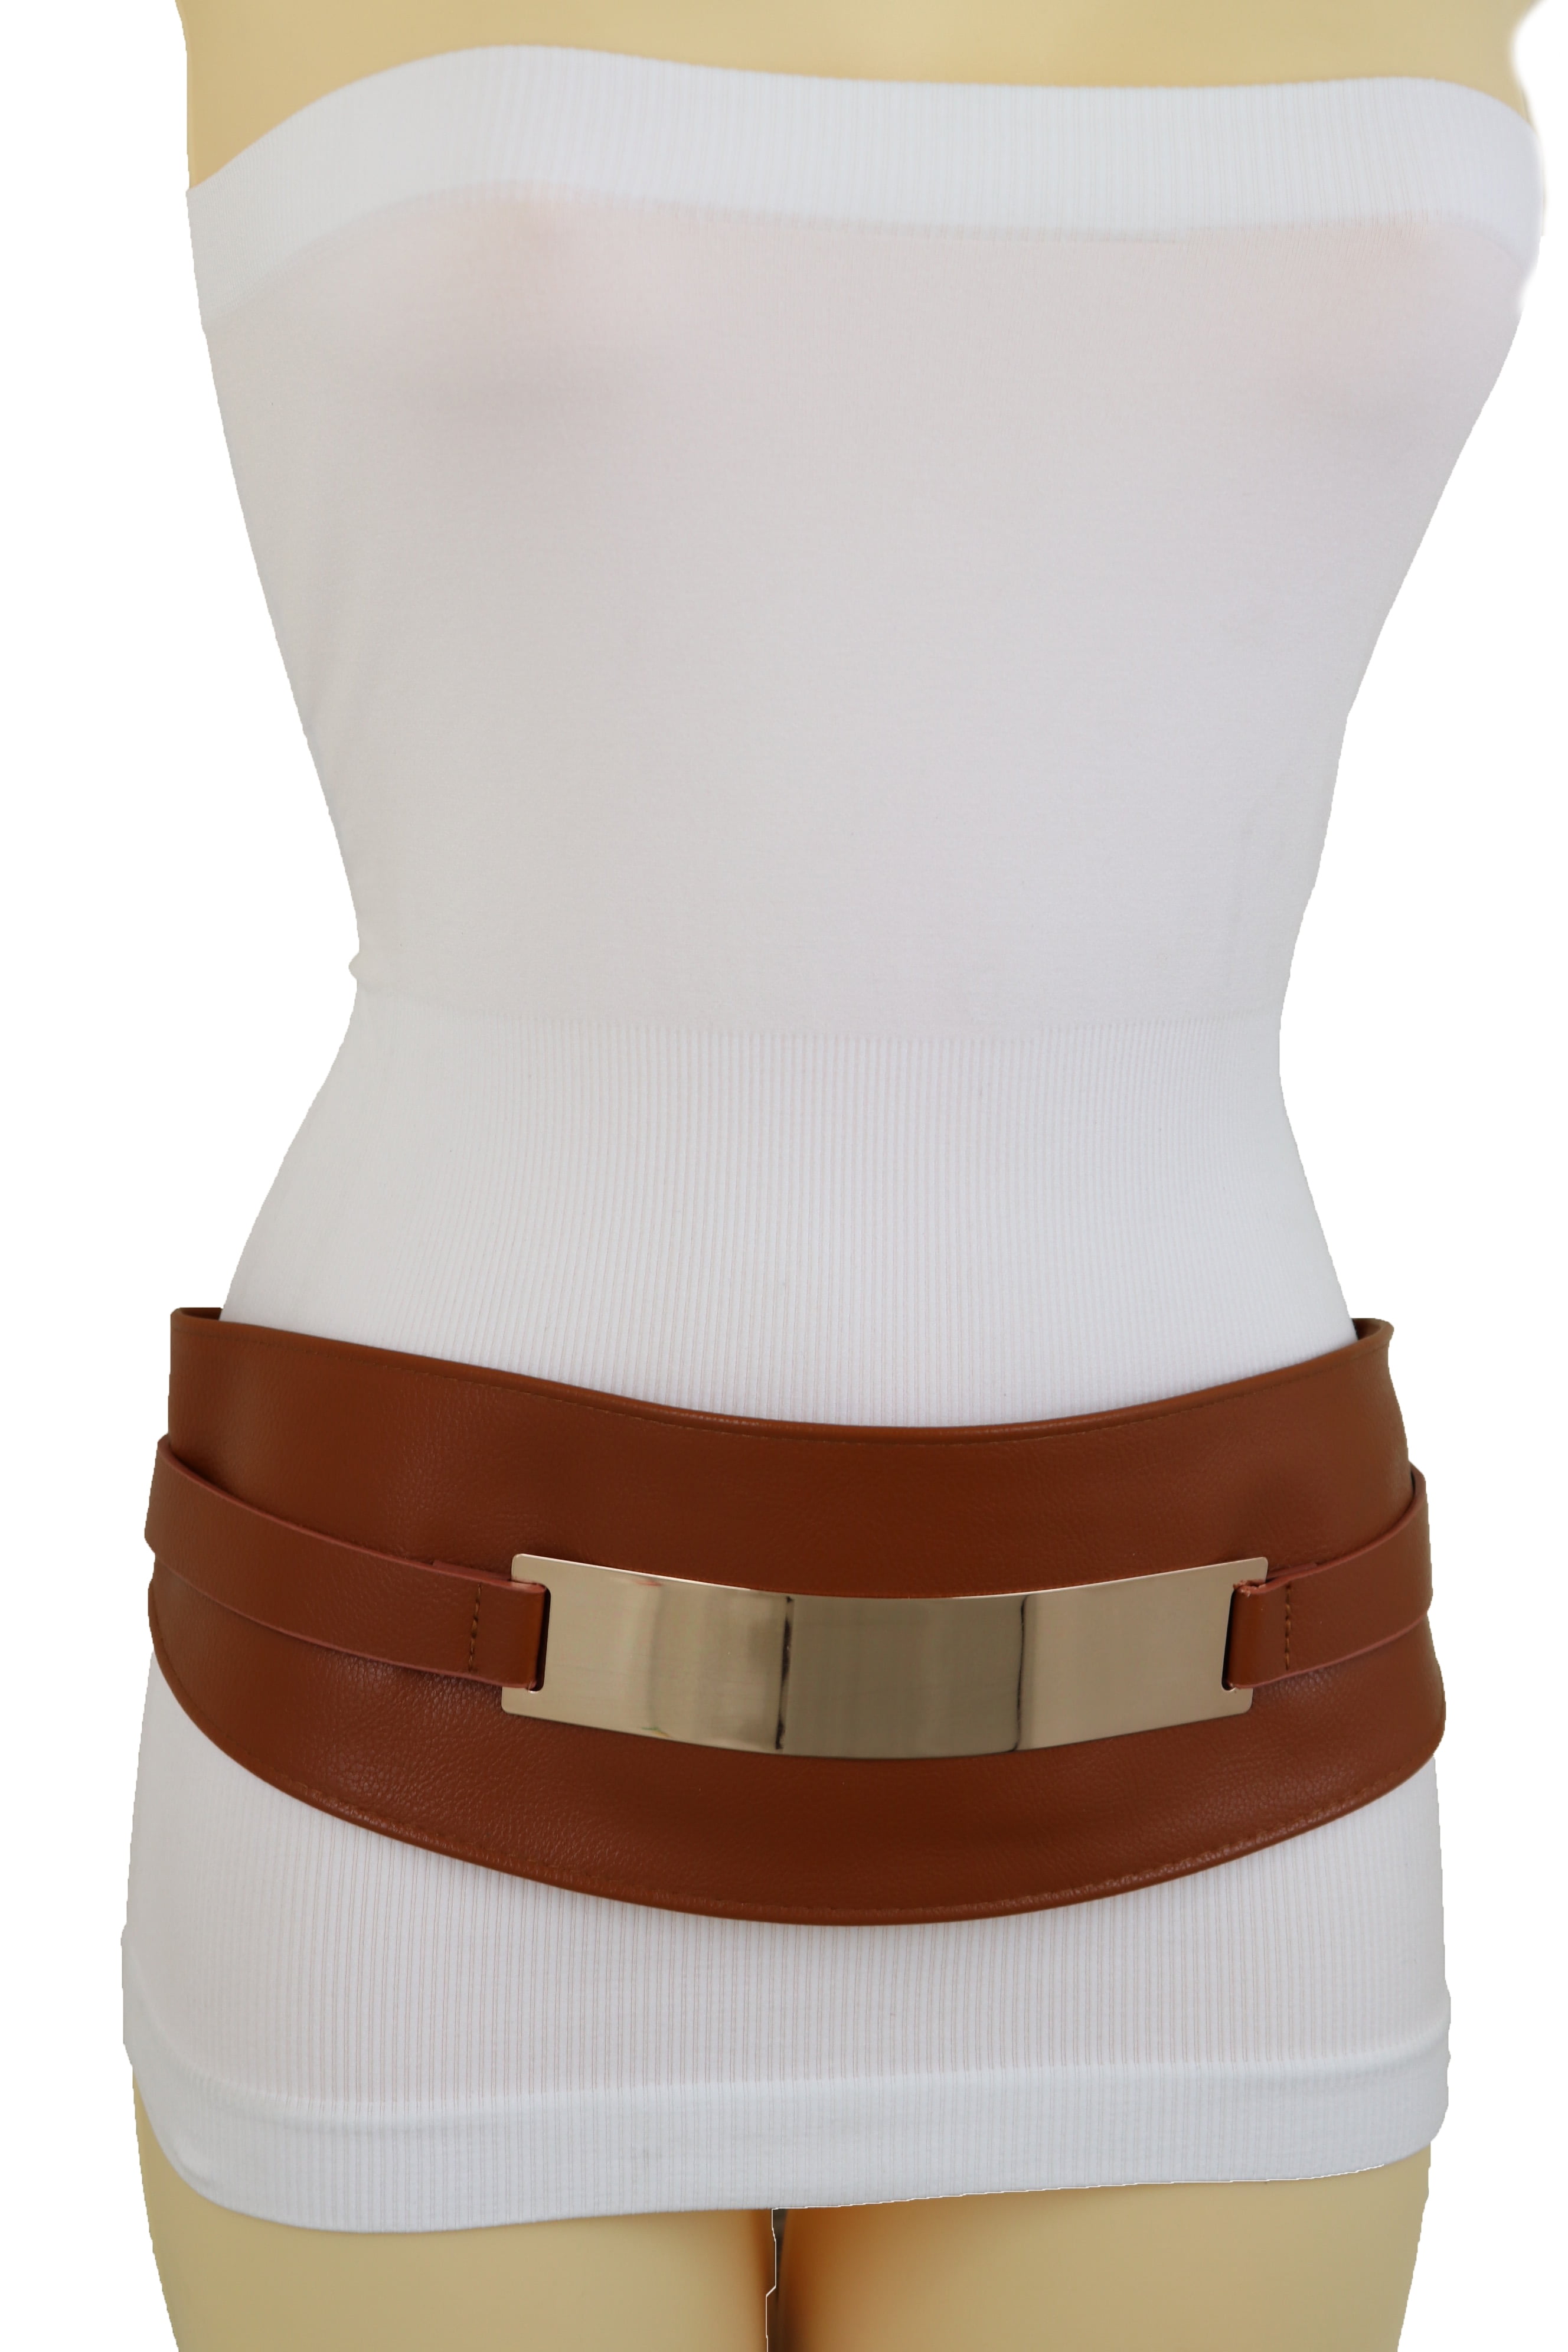 WOMEN WAIST HIP BROWN ELASTIC FASHION BELT SQUARES GOLD BUCKLE WIDE BAND XS S M 